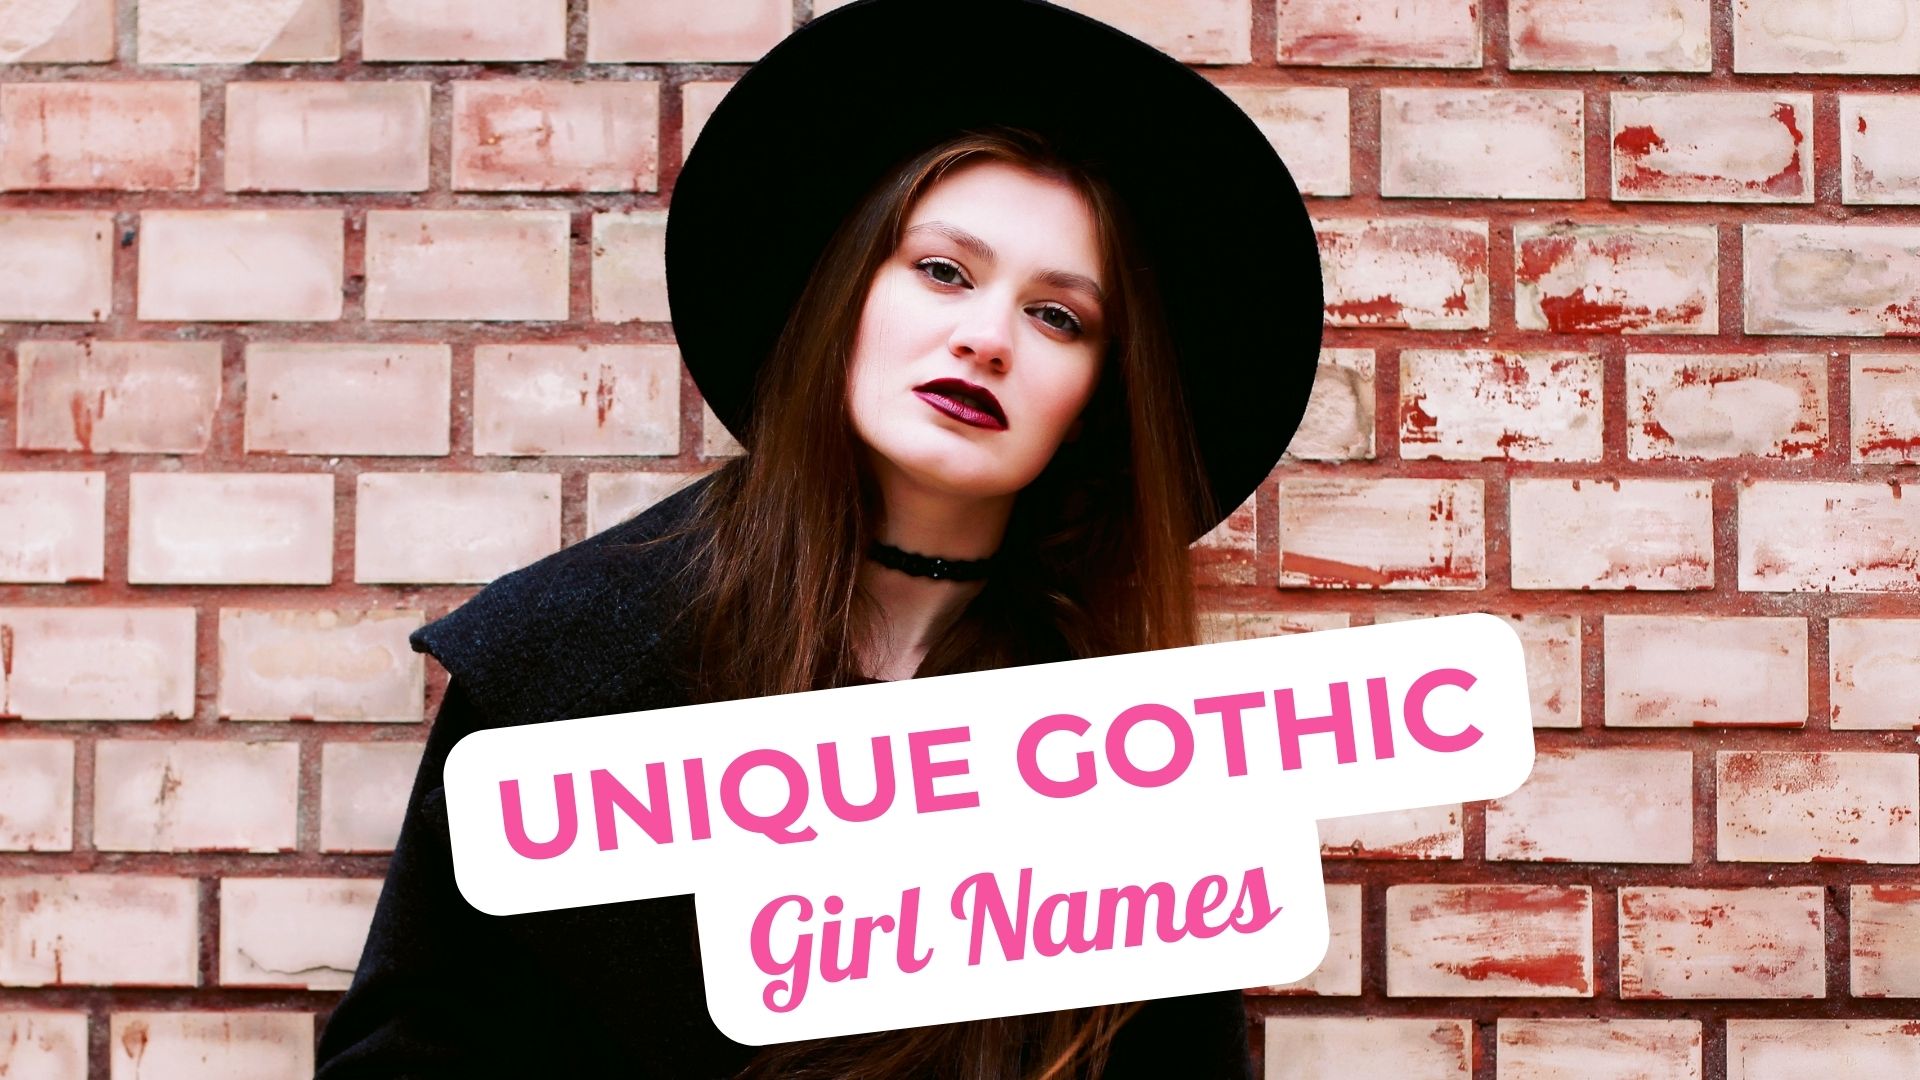 Unique and Edgy Goth Girl Names